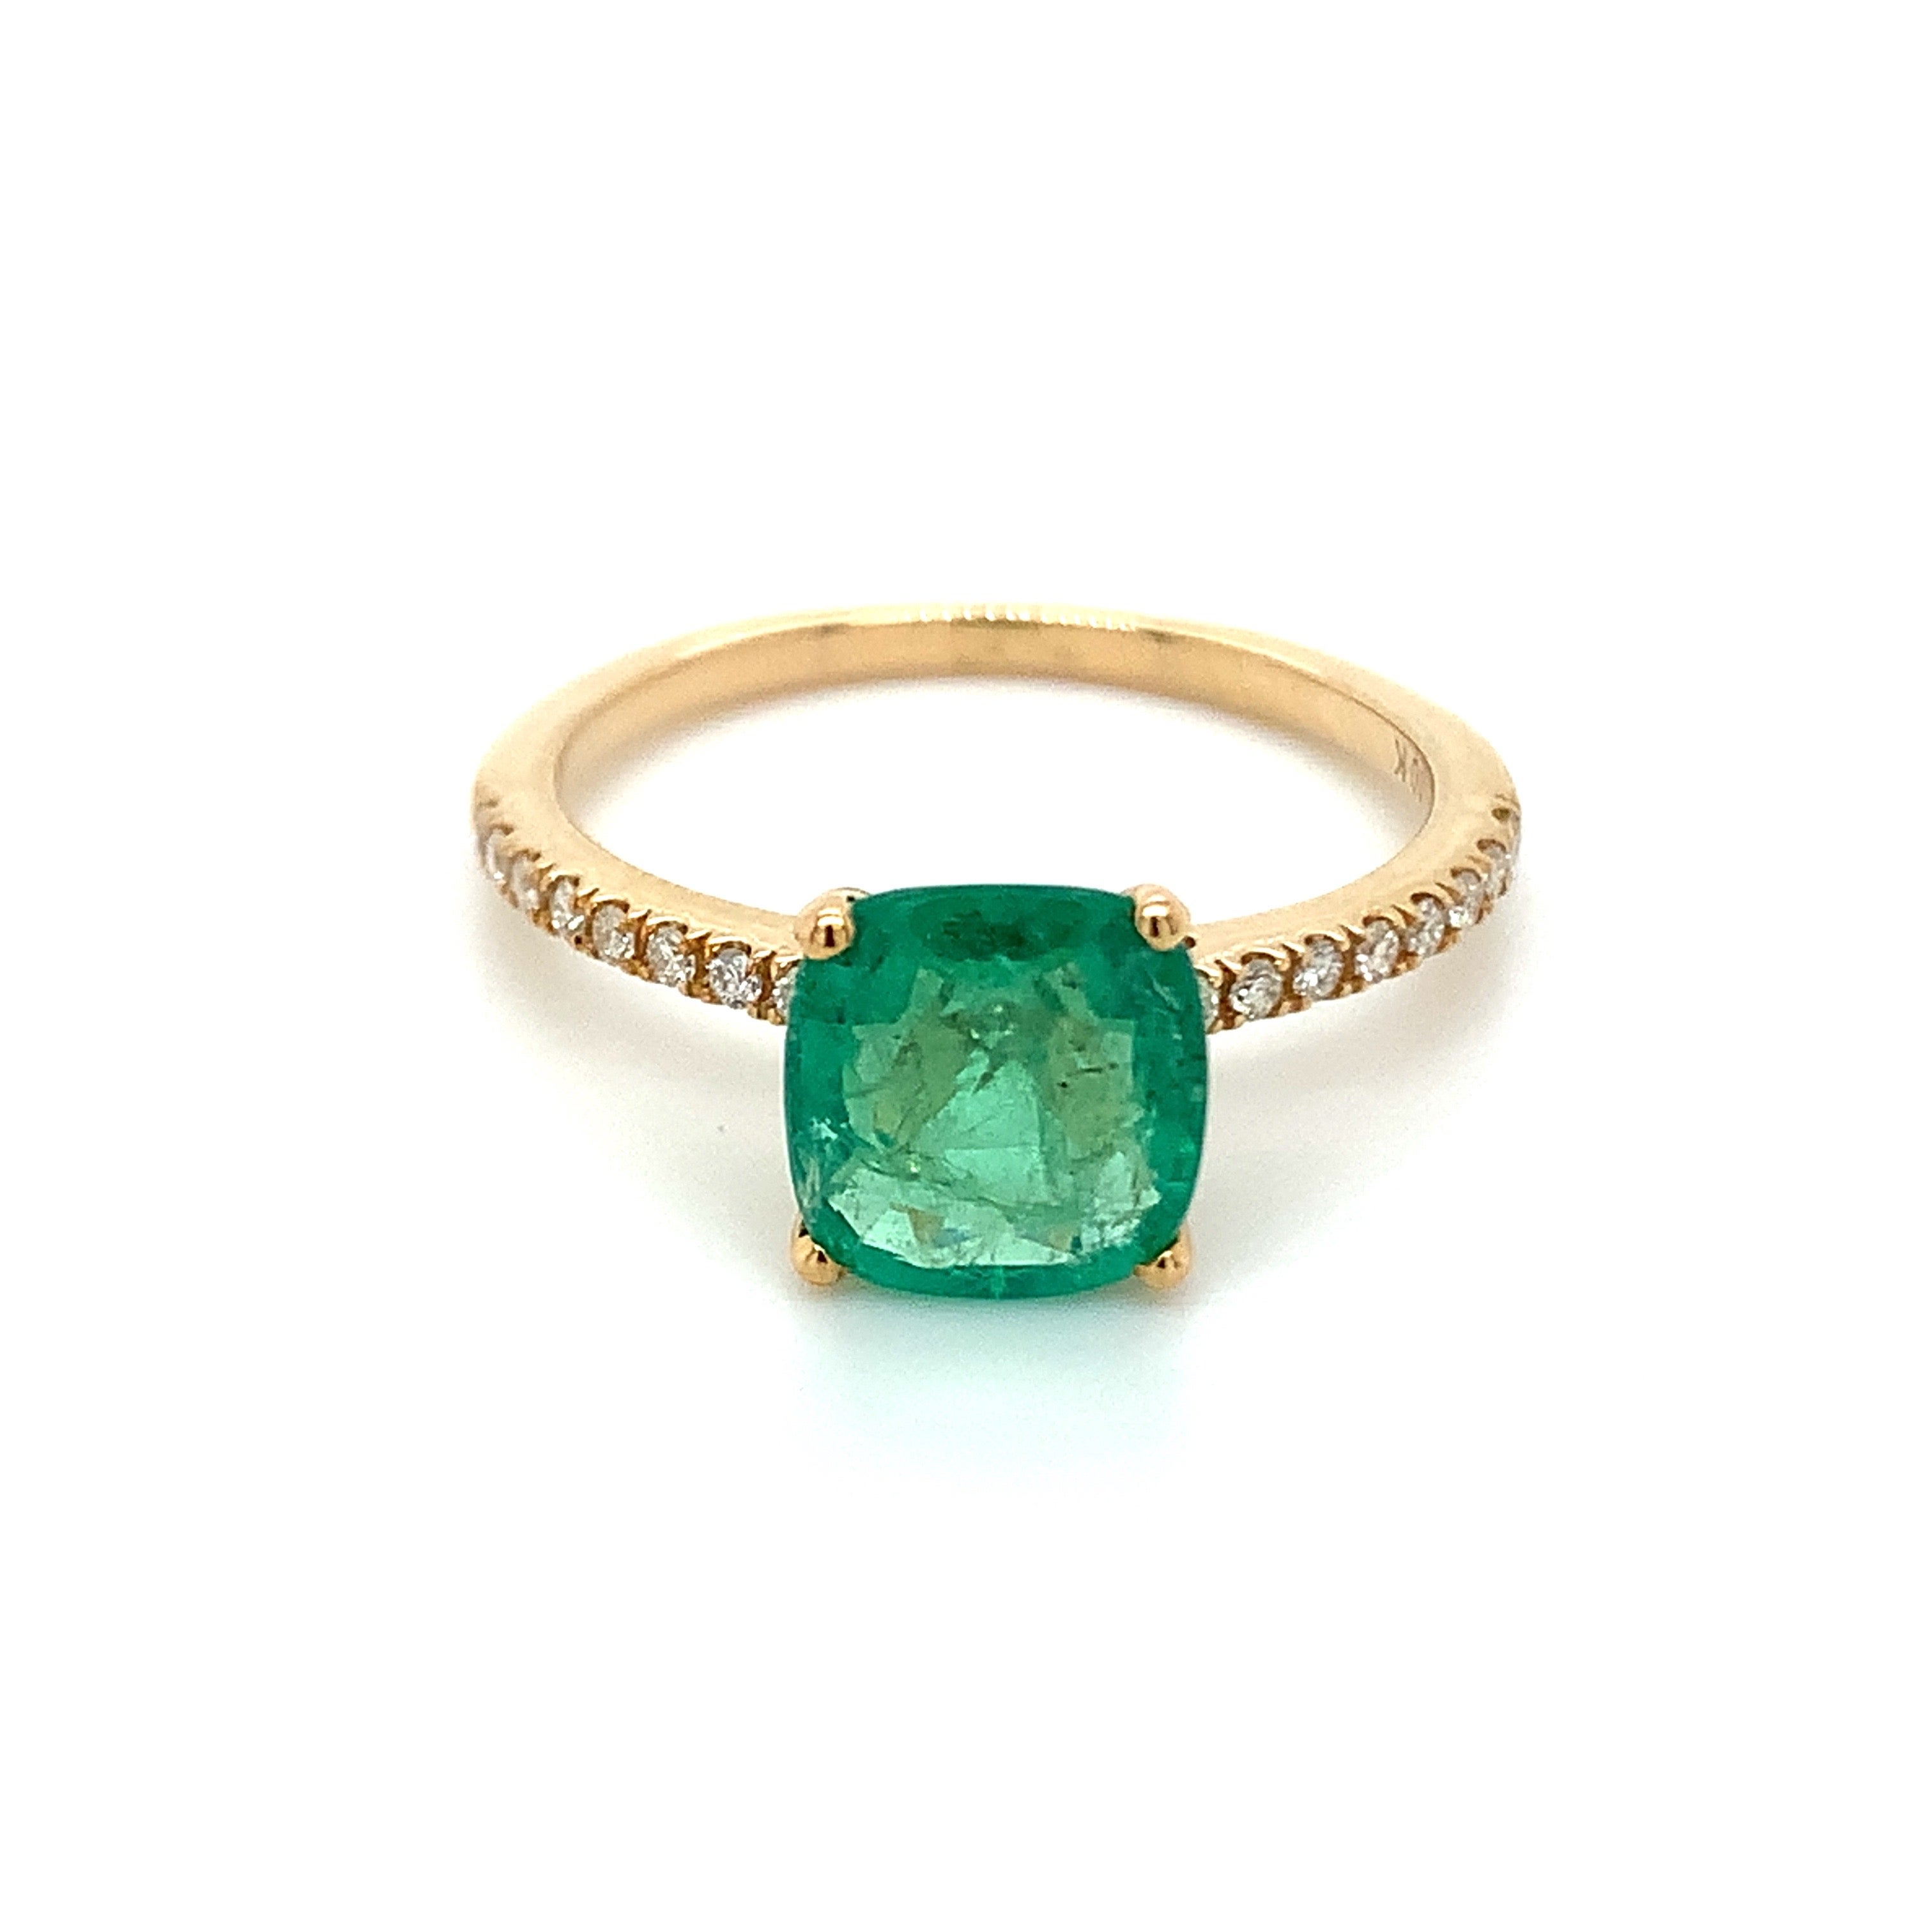 1.60ct Cushion Emerald Ring with Diamond in 10k Yellow Gold